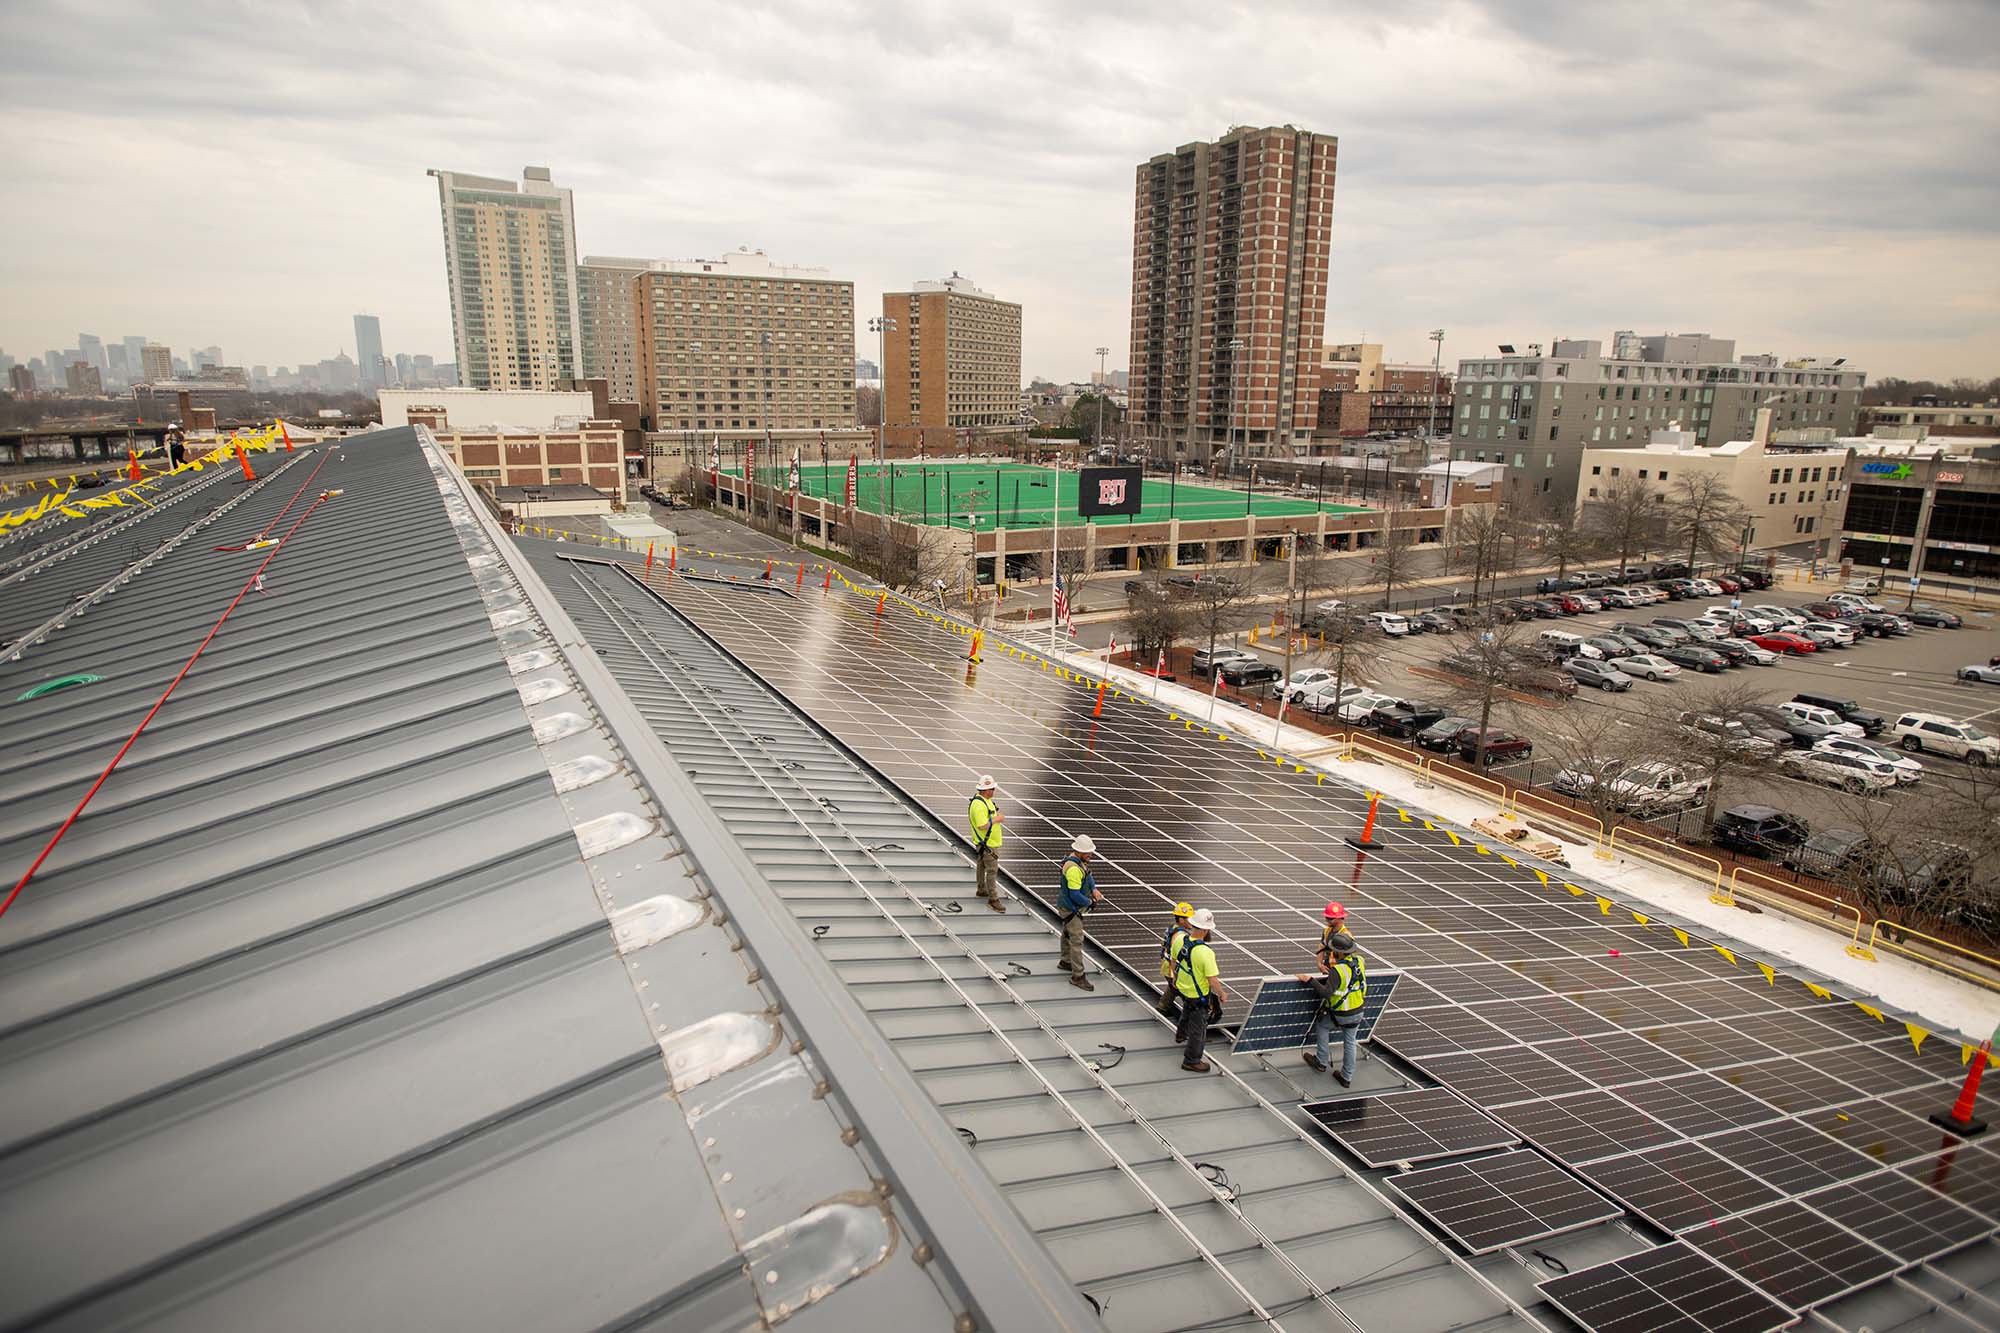 Photo: A team from Solect Energy instals what will ultimately be 1500 solar panels on the roof of the Track and Tennis Center April 6. A group of men wearing hard hats, neon vests, and construction gear work to place a large solar panel on the roof of a large building. In the distance the New Balance field, BU's West Campus, and various brick buildings can be seen.